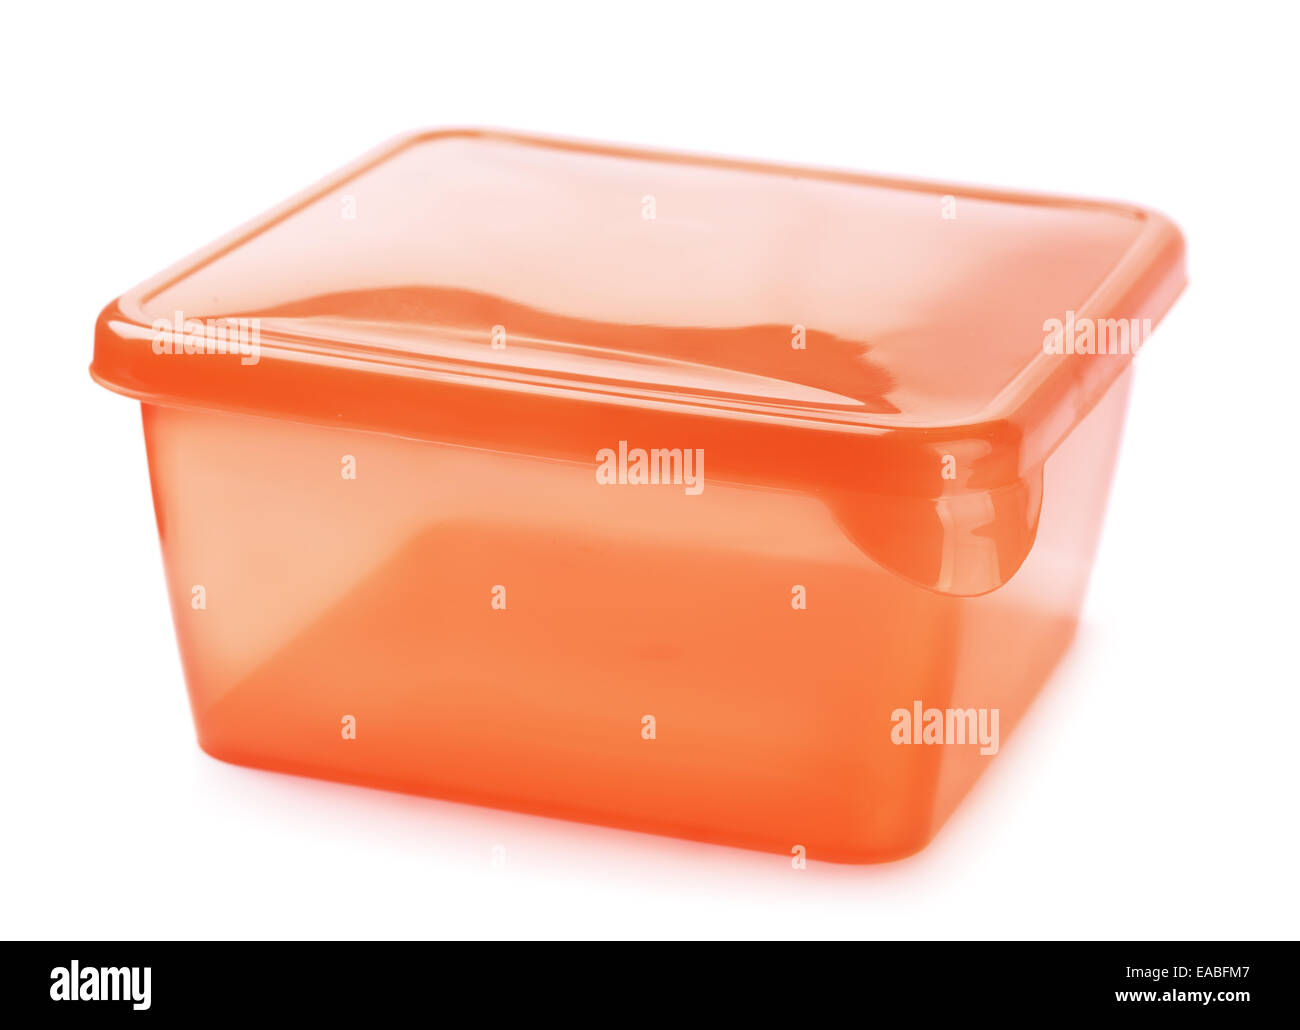 Plastic food container isolated on white Stock Photo